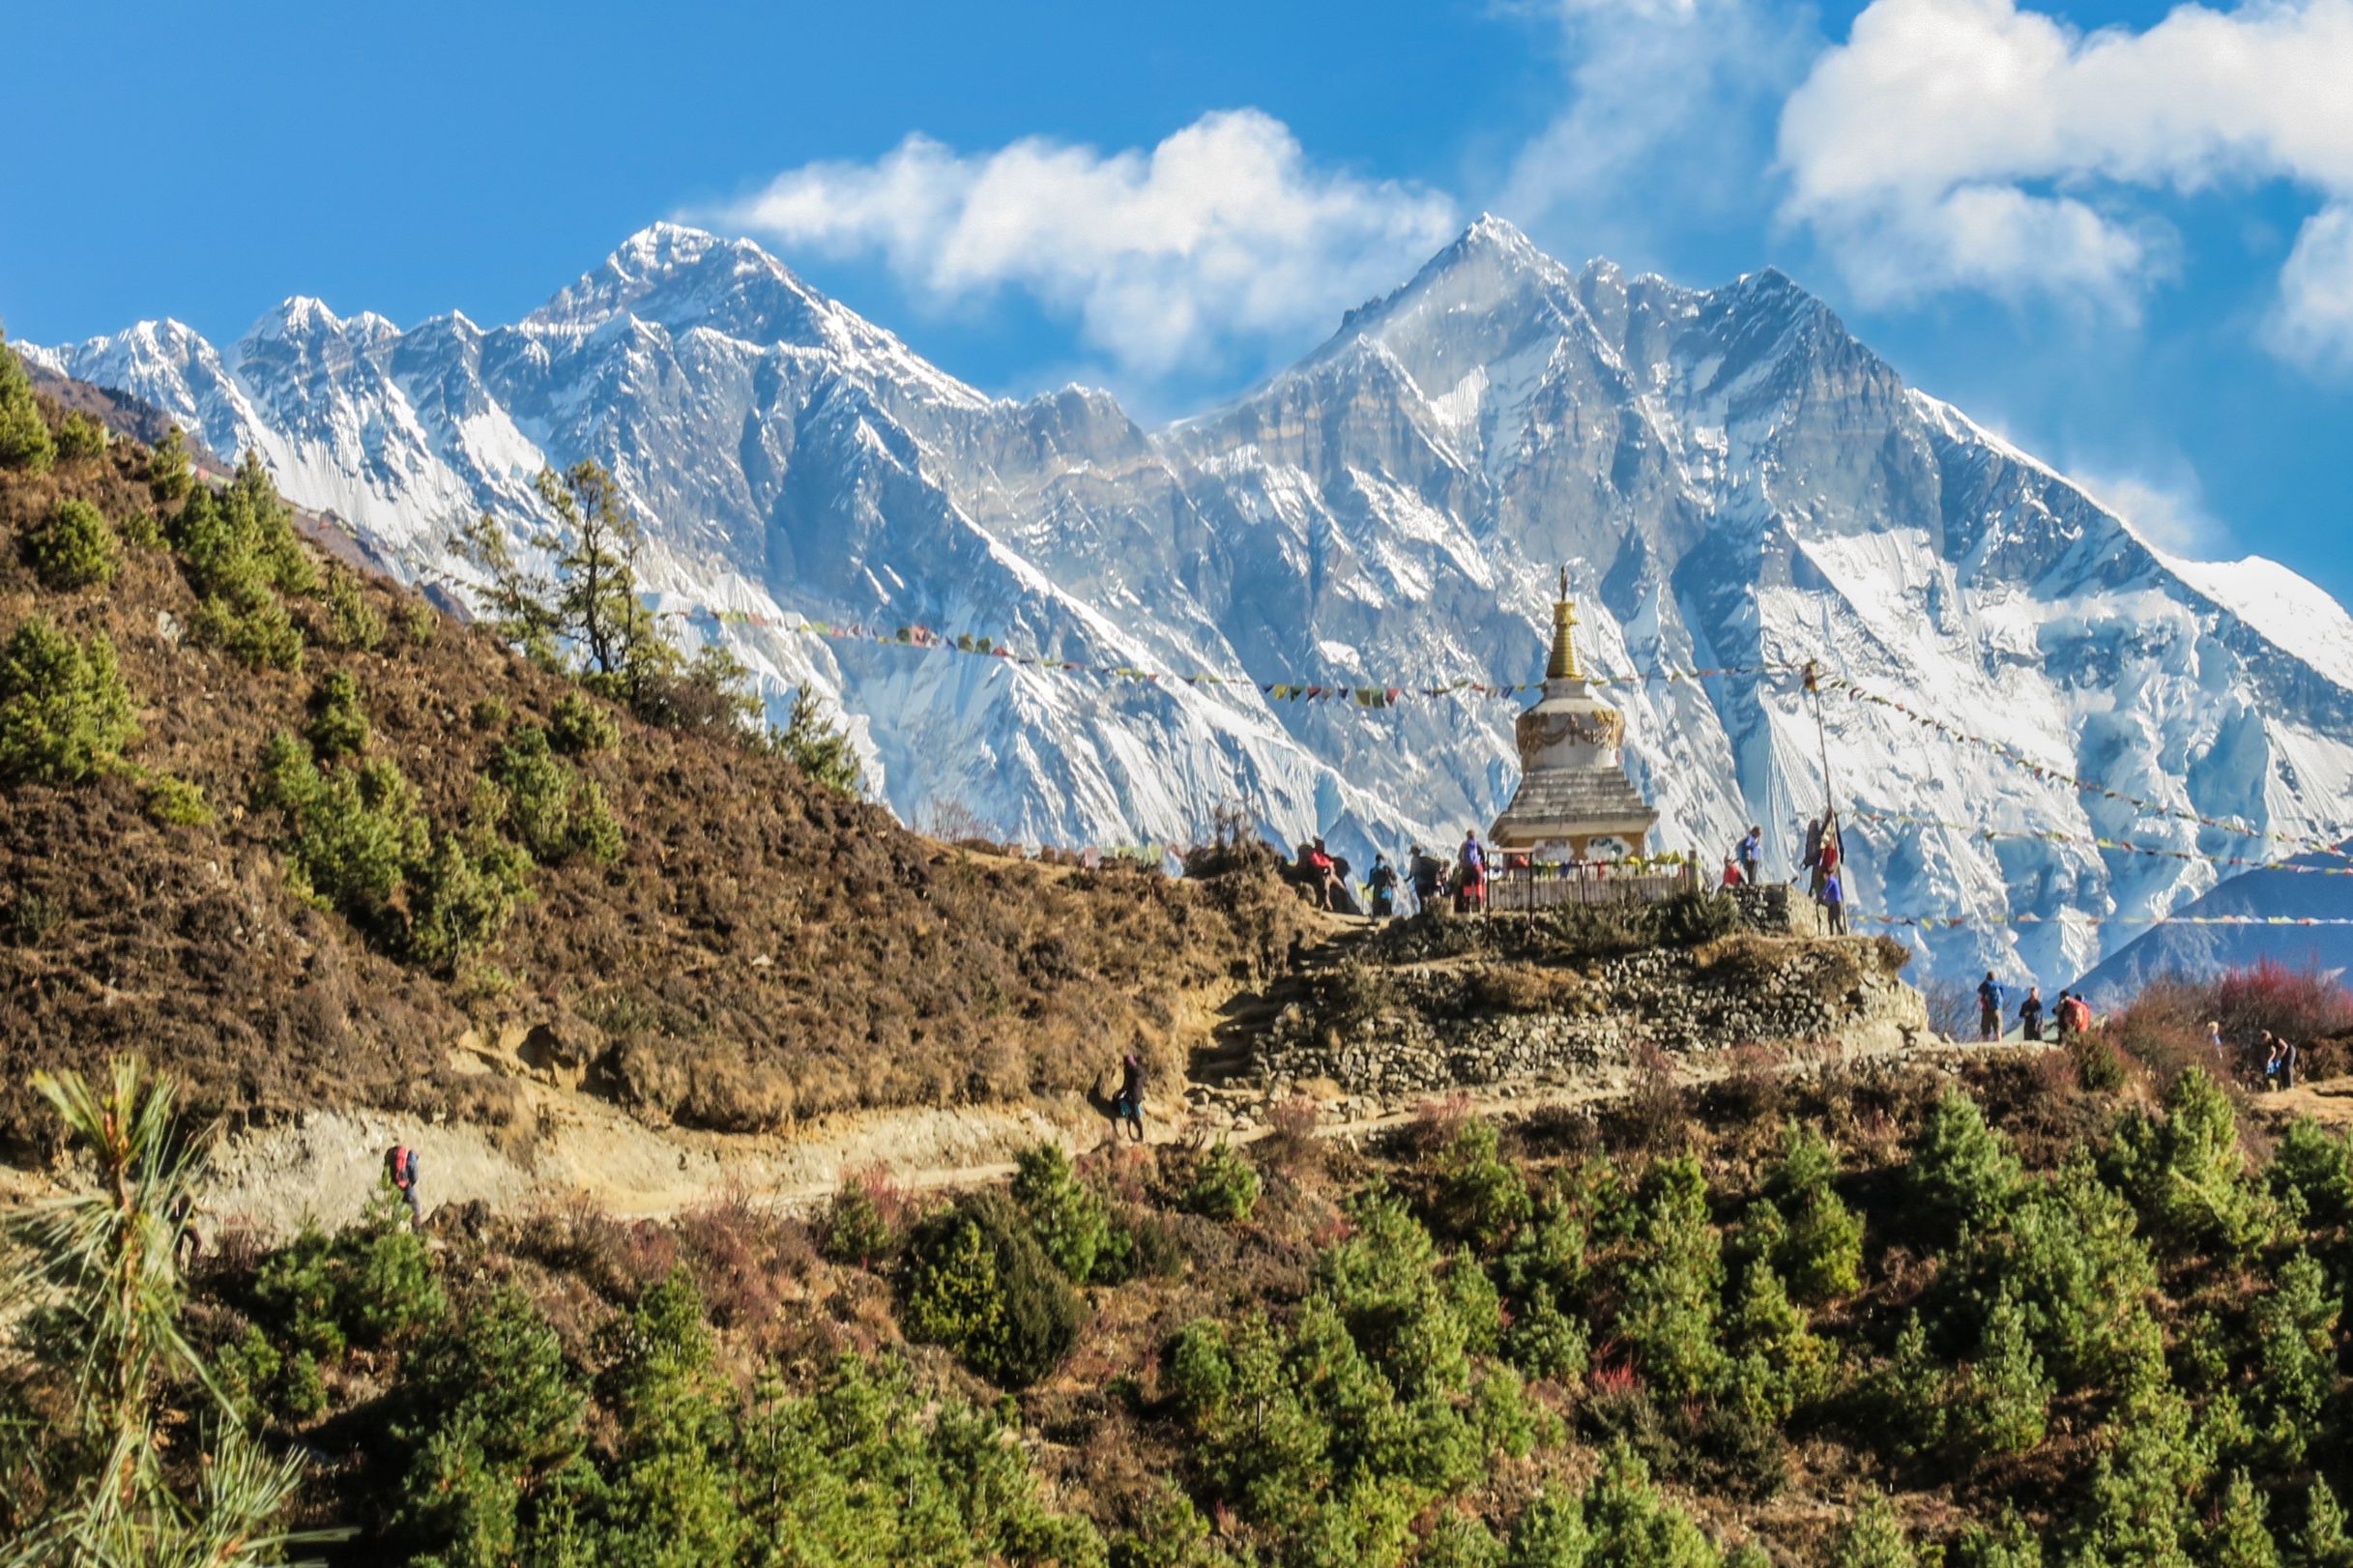 A stupa in Nepal with the snowcapped Himalaya mountains behind.